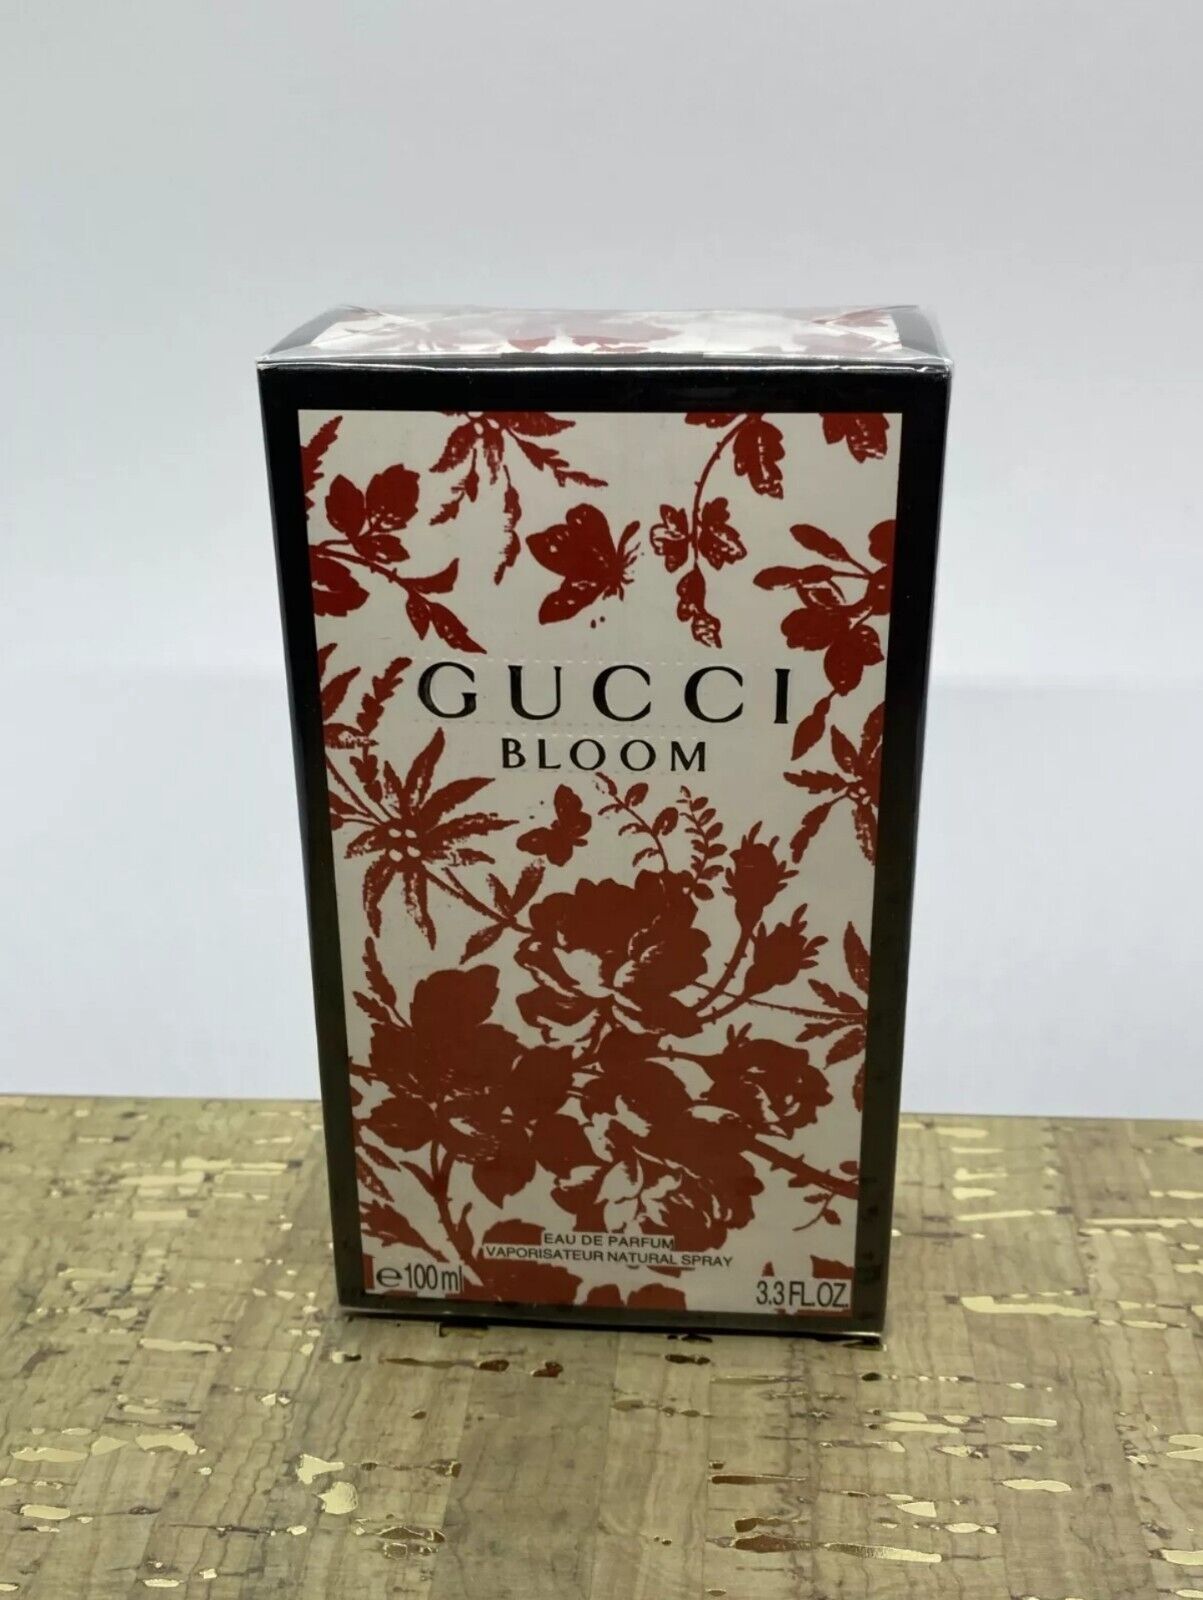 Bloom by Gucci3.3oz / 100 ml EDP Spray for Women Birthday Gift New In Sealed Box